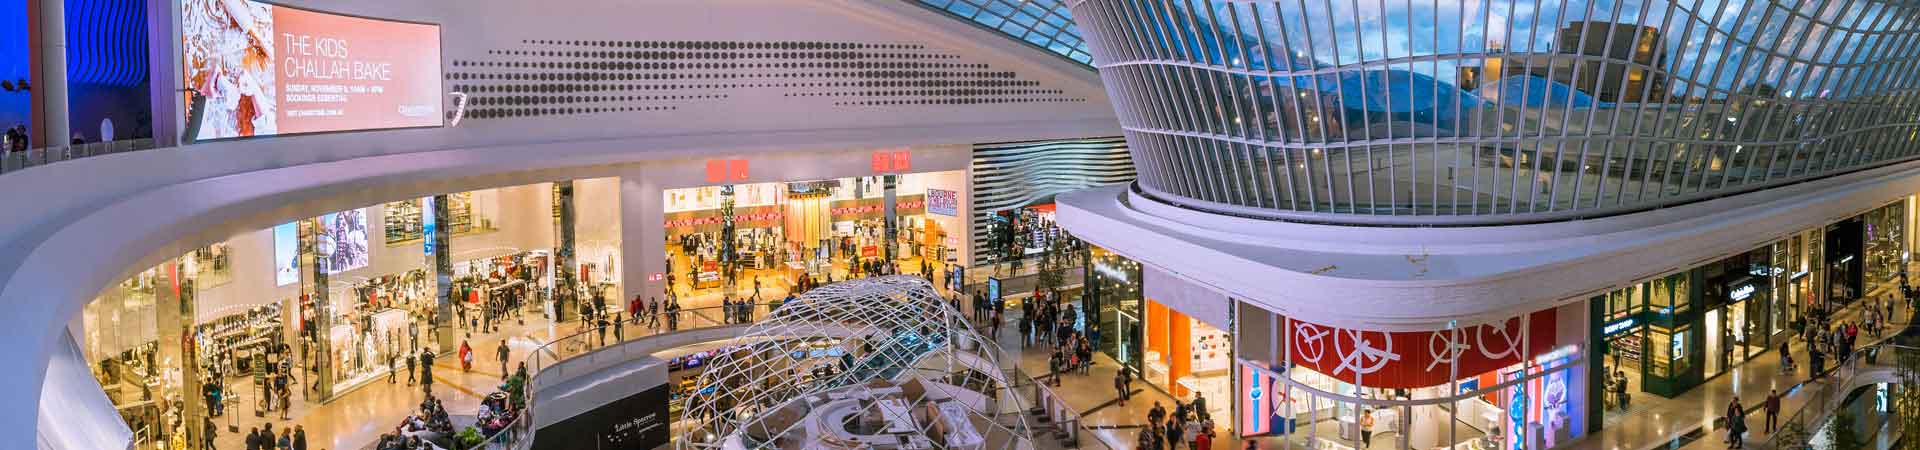 Air conditioning and comfort in shopping centers